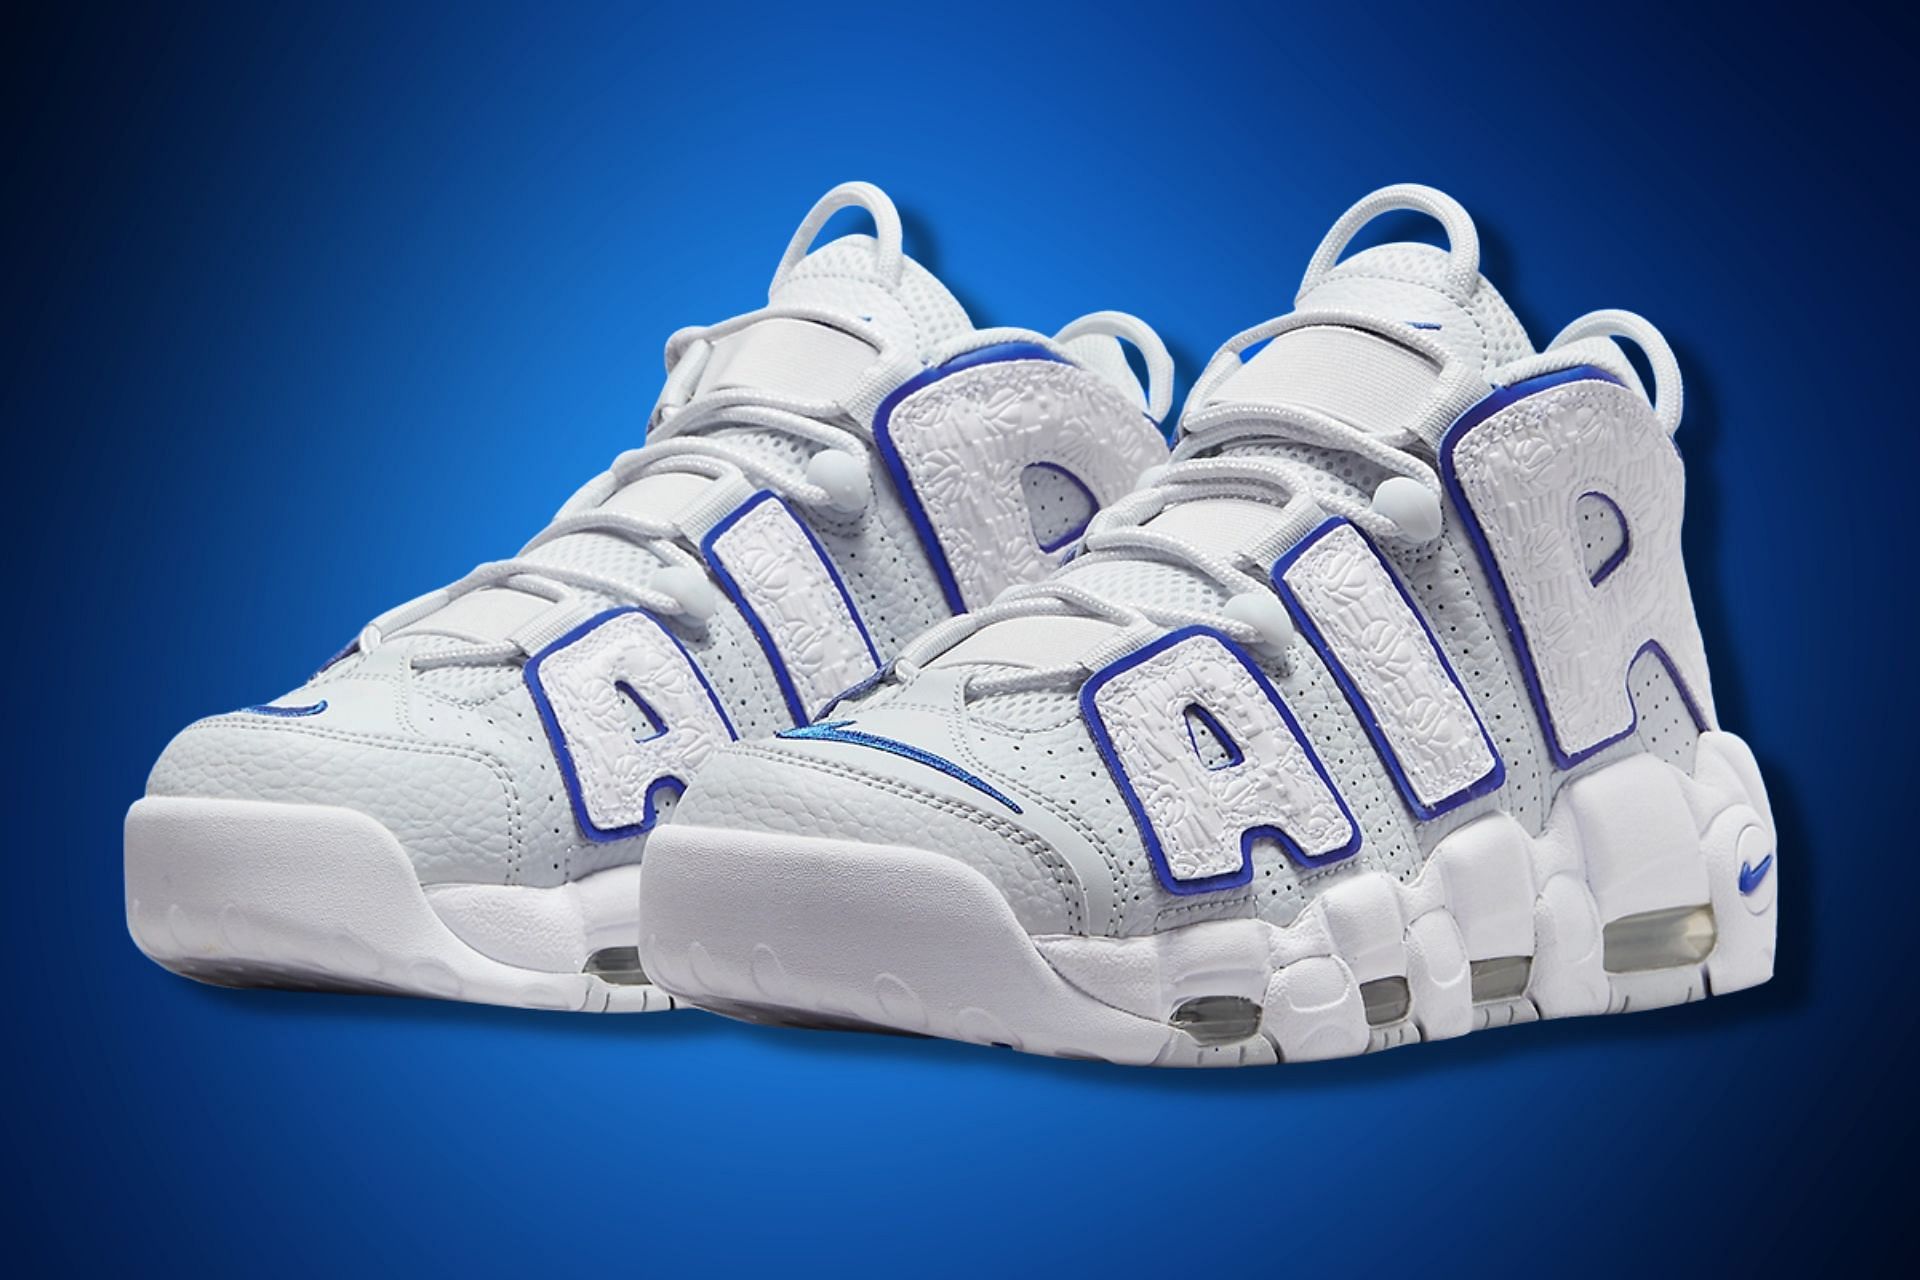 Where to buy Nike Air More Uptempo '96 Embossed edition? Price more details explored